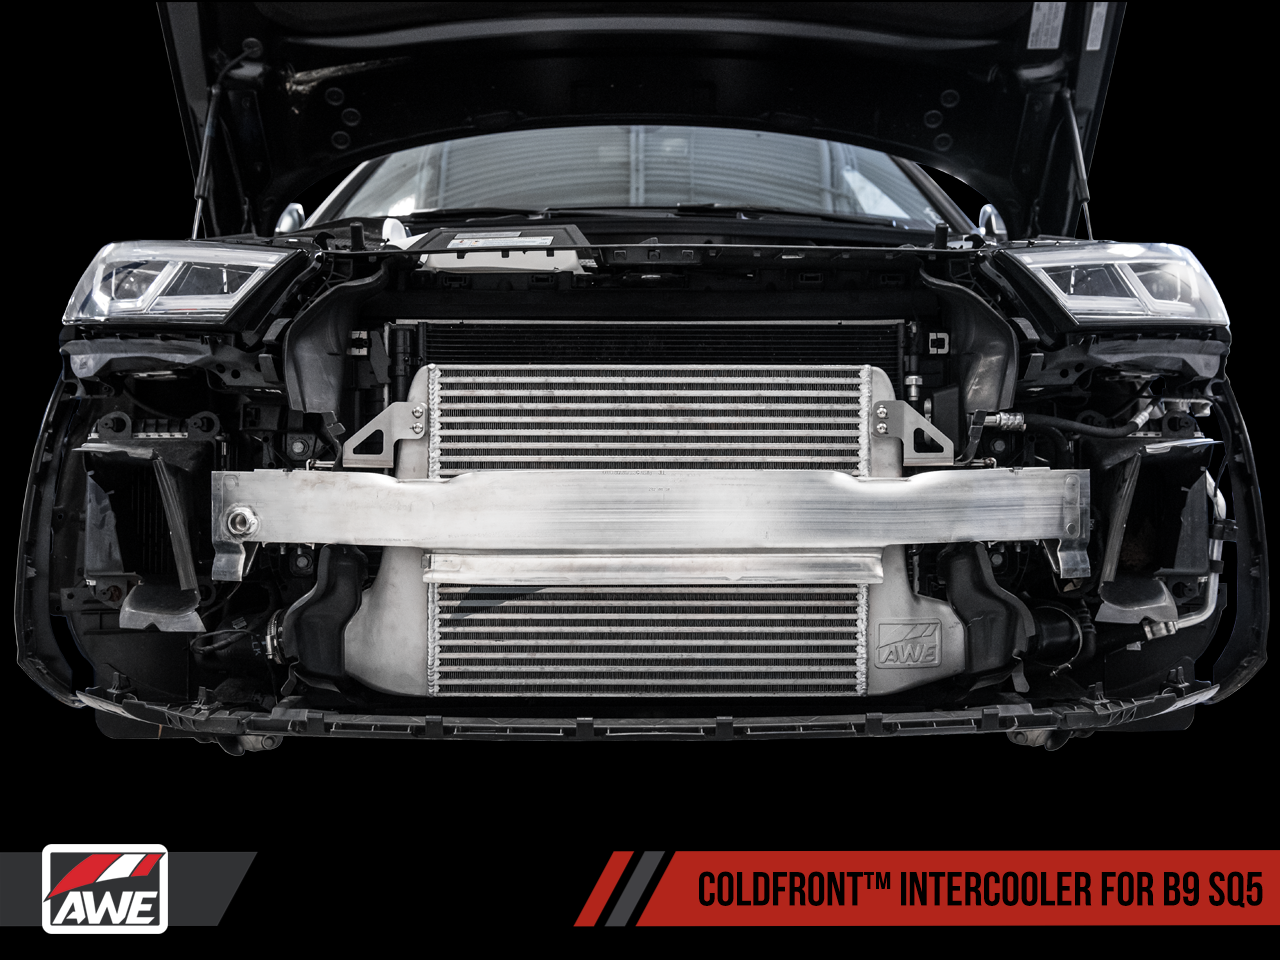 AWE ColdFront Intercooler for B9 SQ5